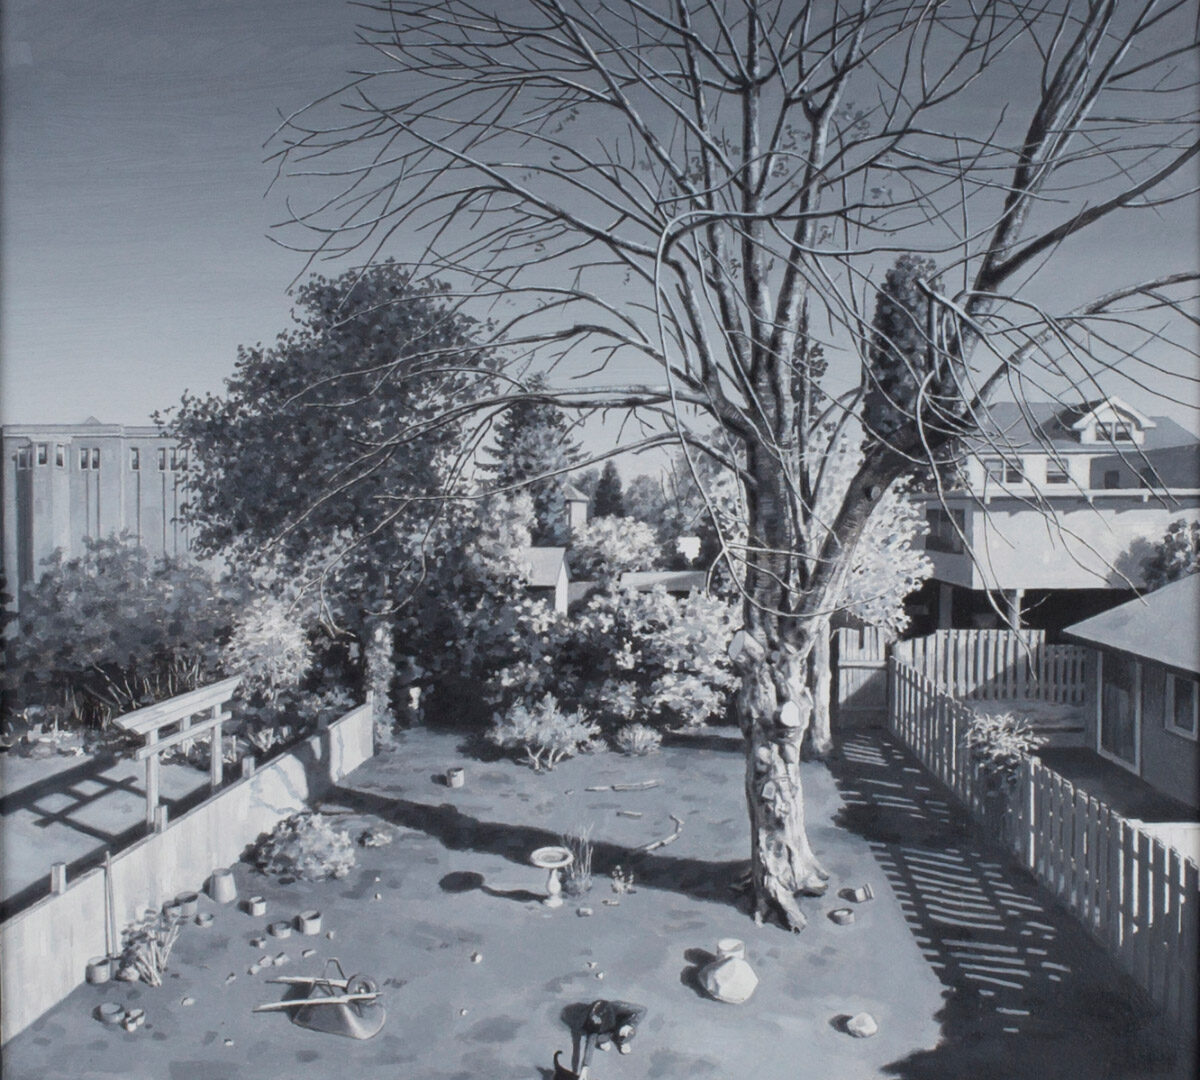 Black, white, and grey painting of a fenced-in backyard scene with a large tree, a person petting a cat, an upside-down wheelbarrow